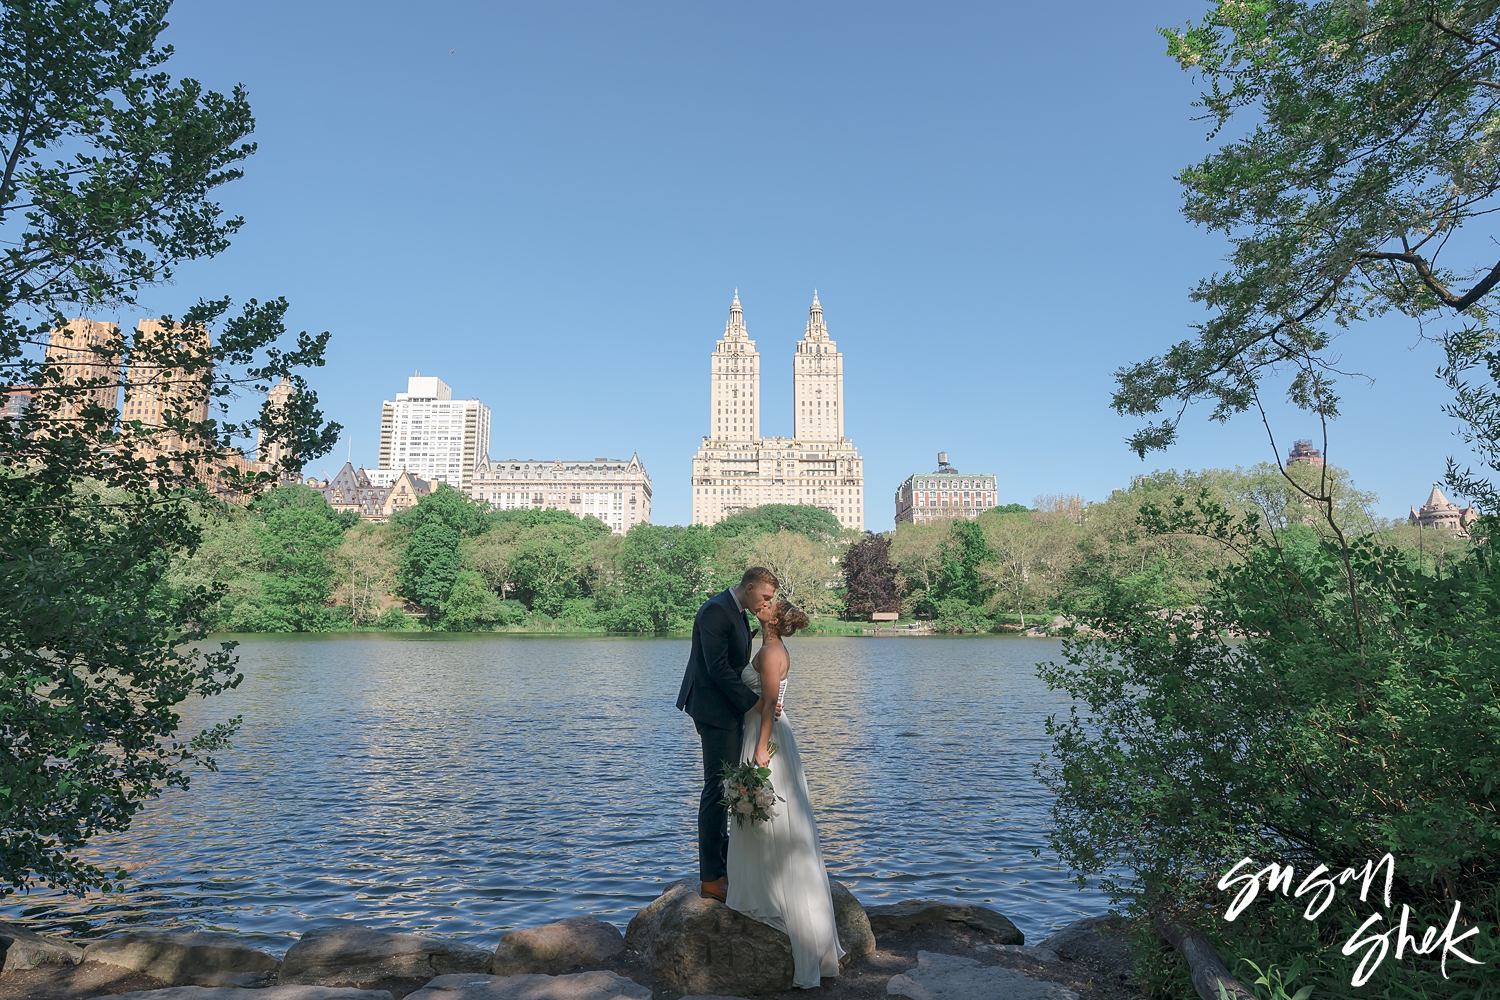 elope, elopement, elope in nyc, nyc elopement, central park wedding,